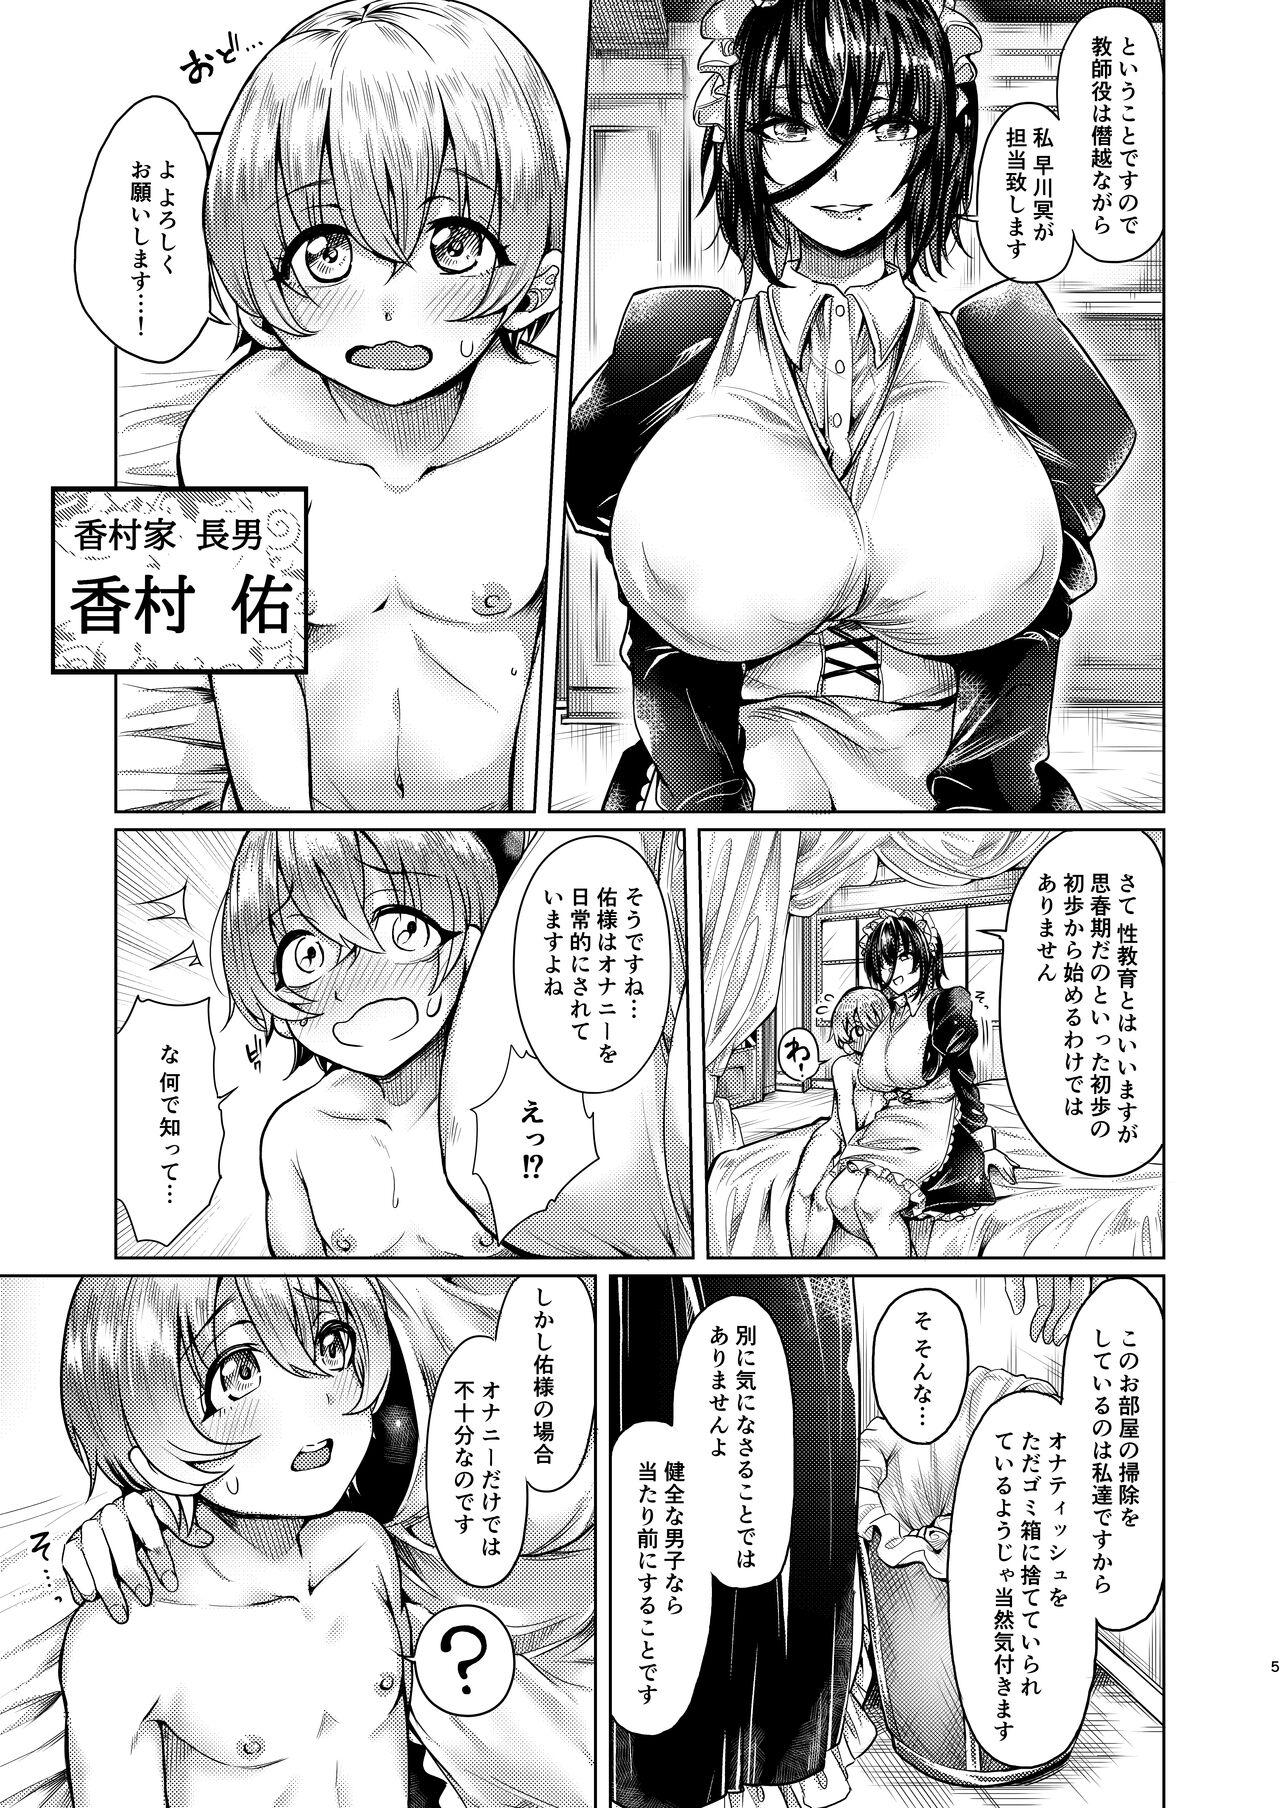 Teenfuns Shota to Maid. - A young boy and his maid - Original Boyfriend - Page 5